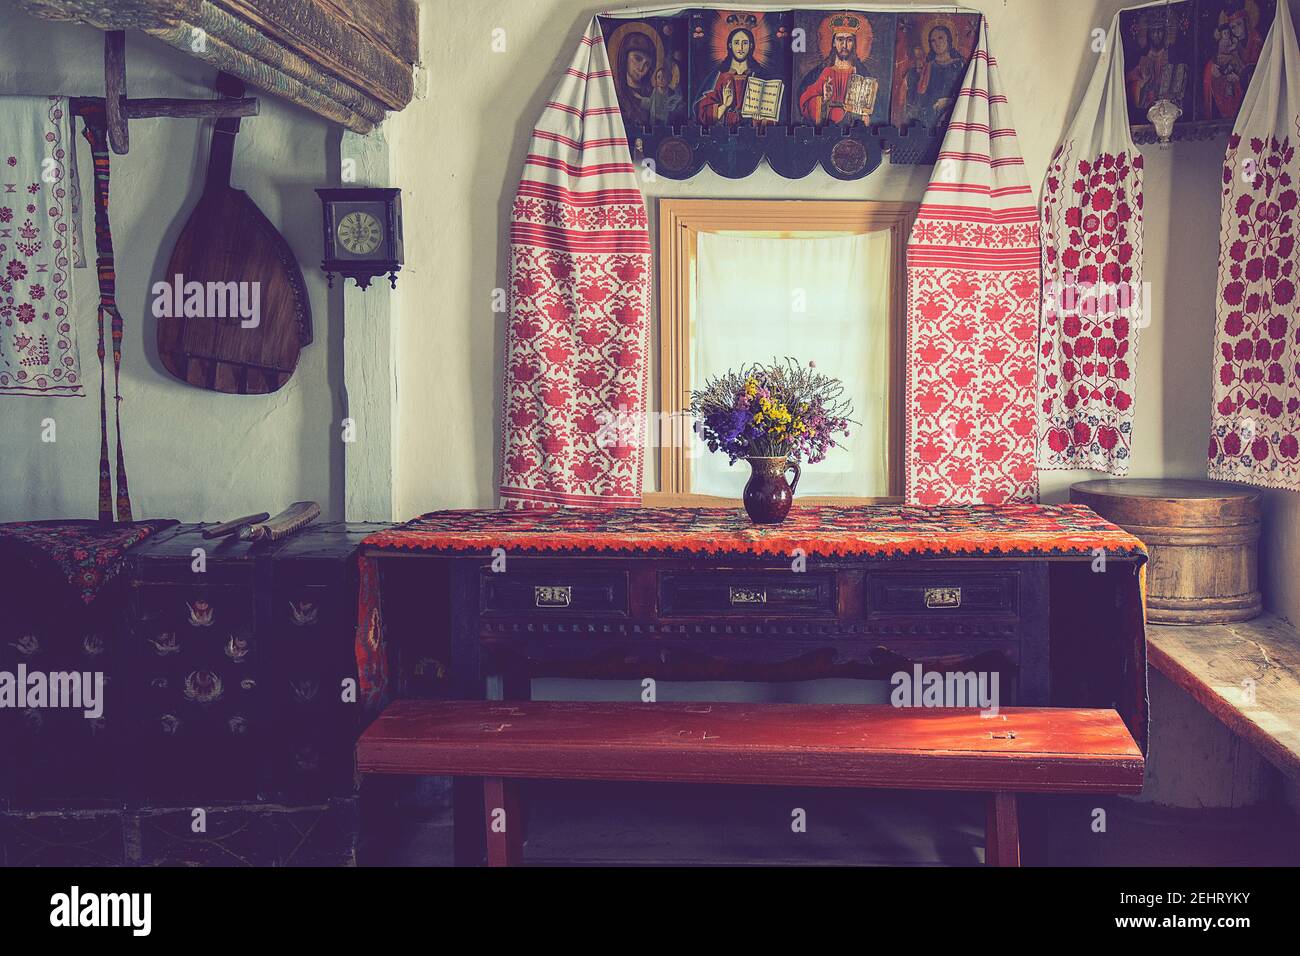 Ethnic towels, bunch of dry flowers and historical icons on white walls. Wood benches near the window.Vintage interior room in the national Museum of Stock Photo